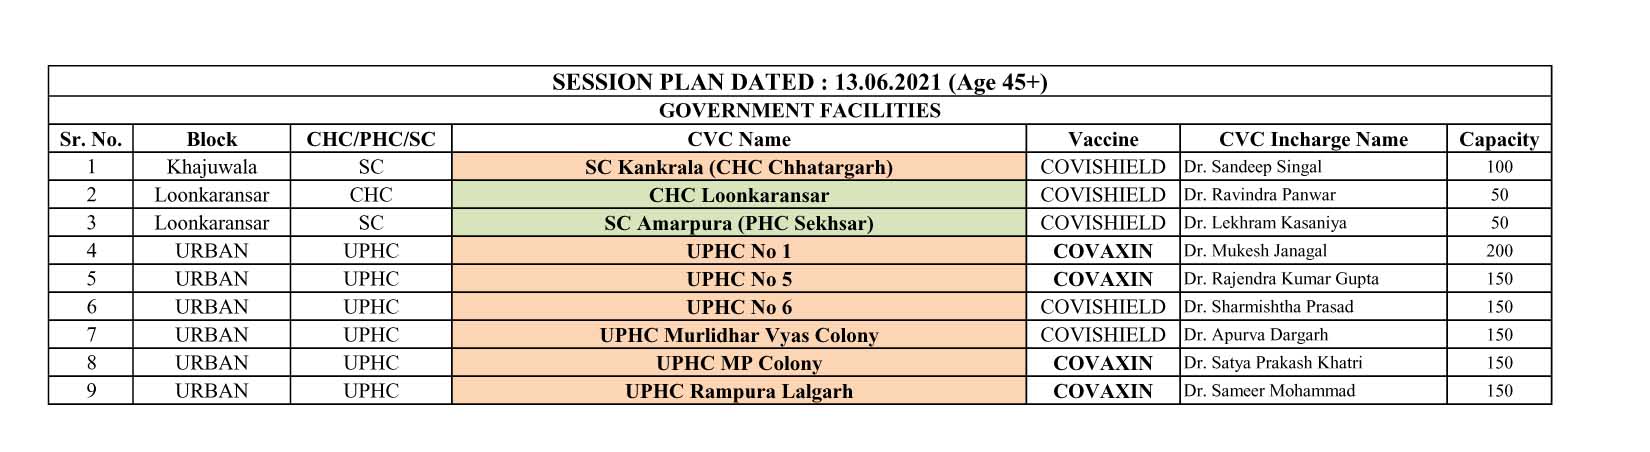 45 Session Plan Dated 13.06.2021 copy